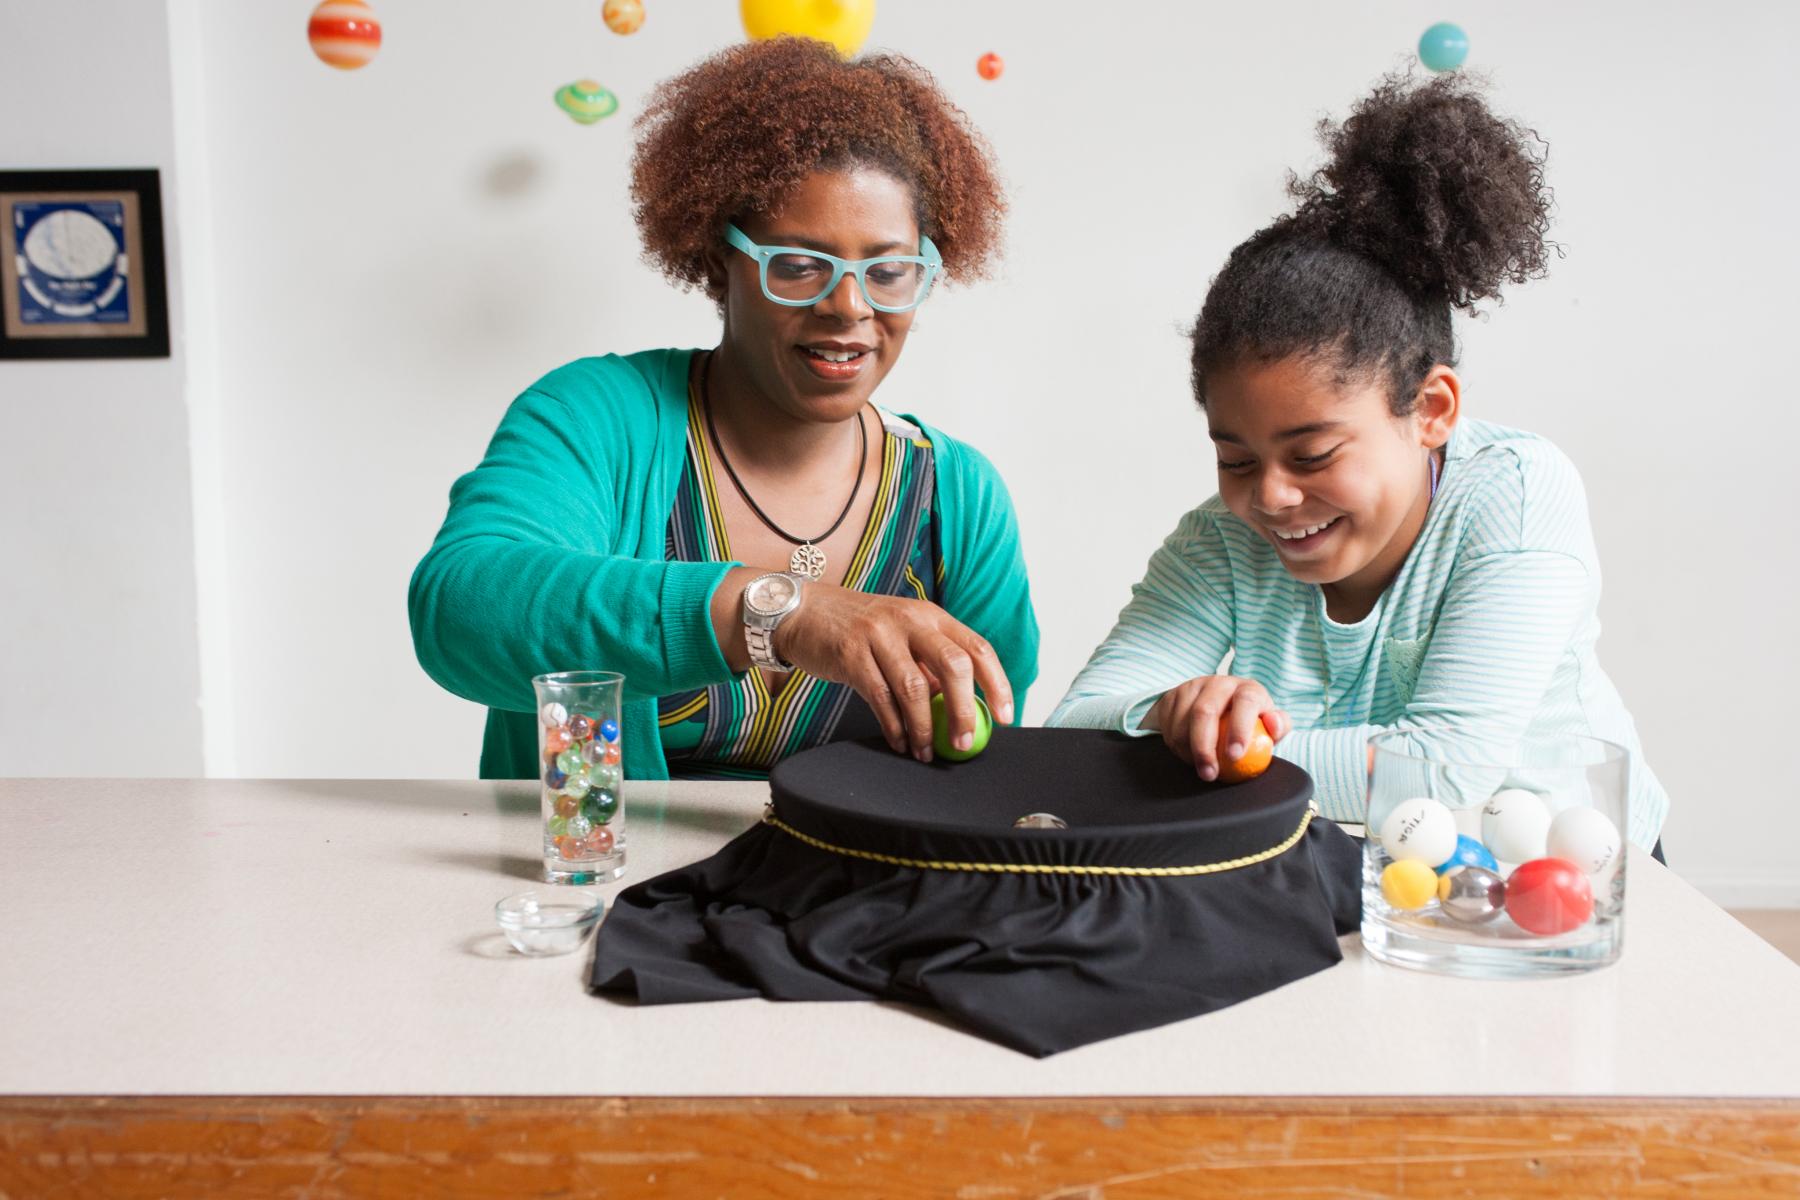 Adult and child sit at a table and work on a science project.